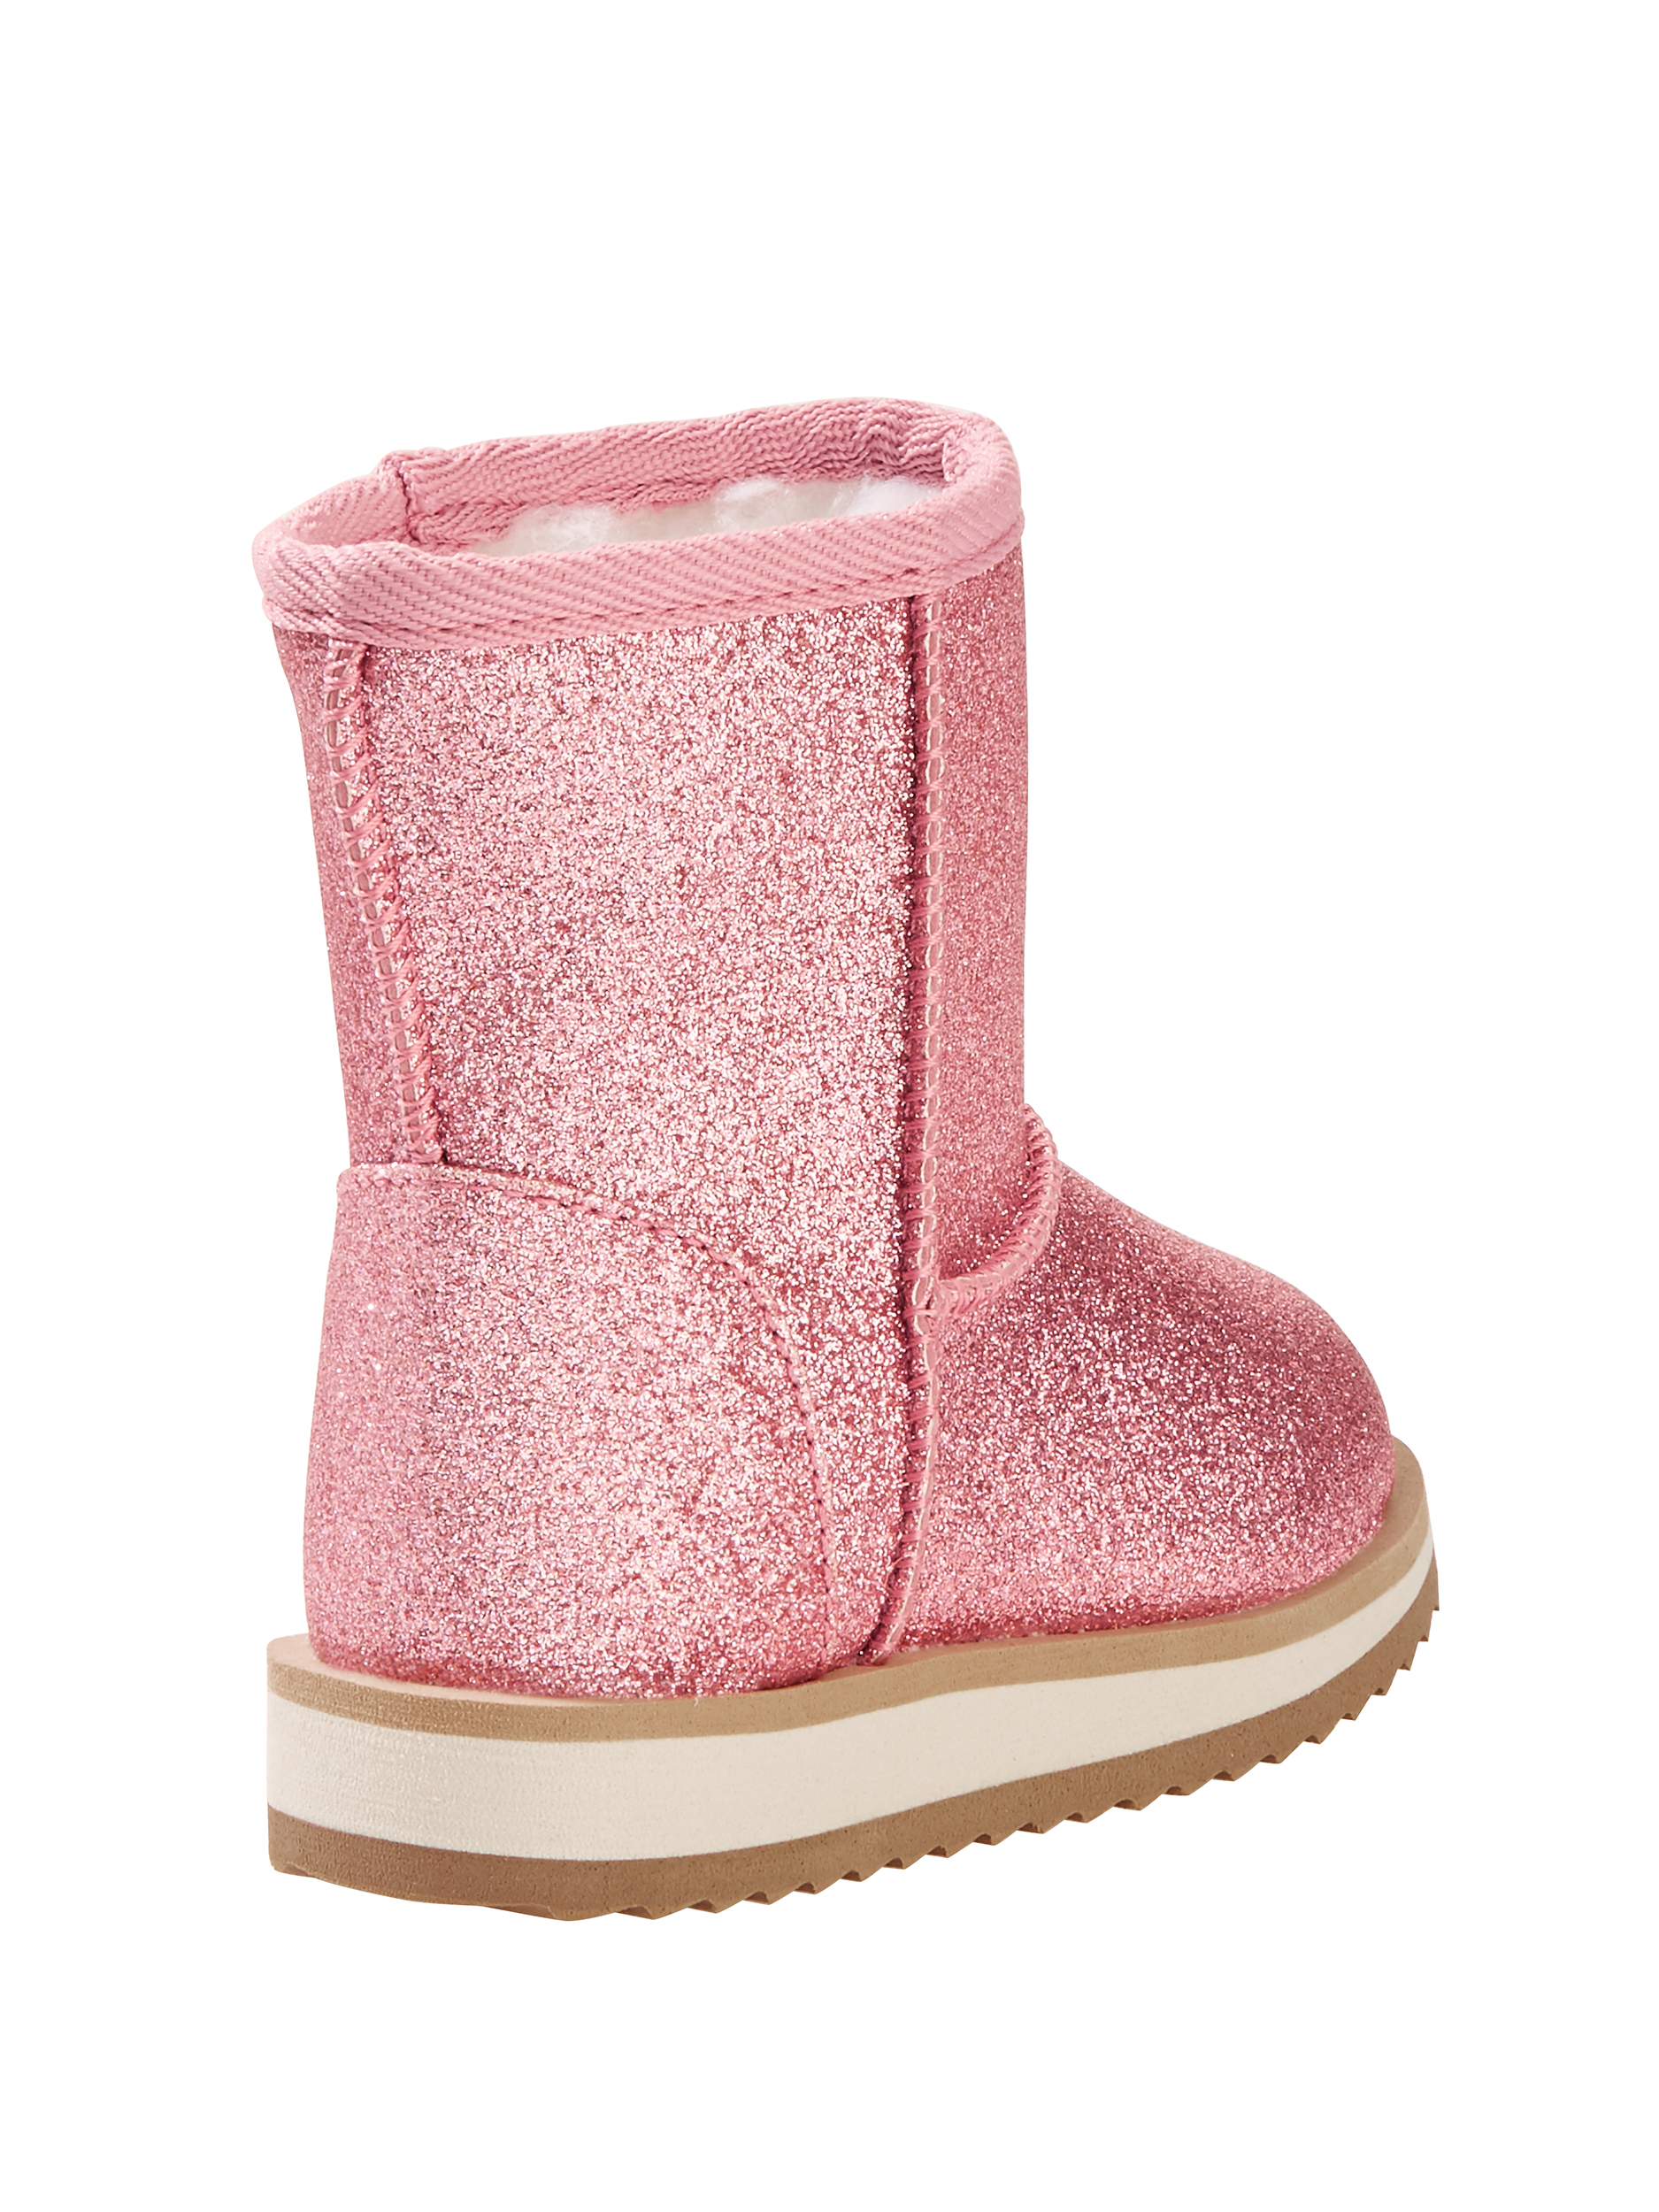 Wonder Nation Girls Faux Shearling Boots - image 5 of 6